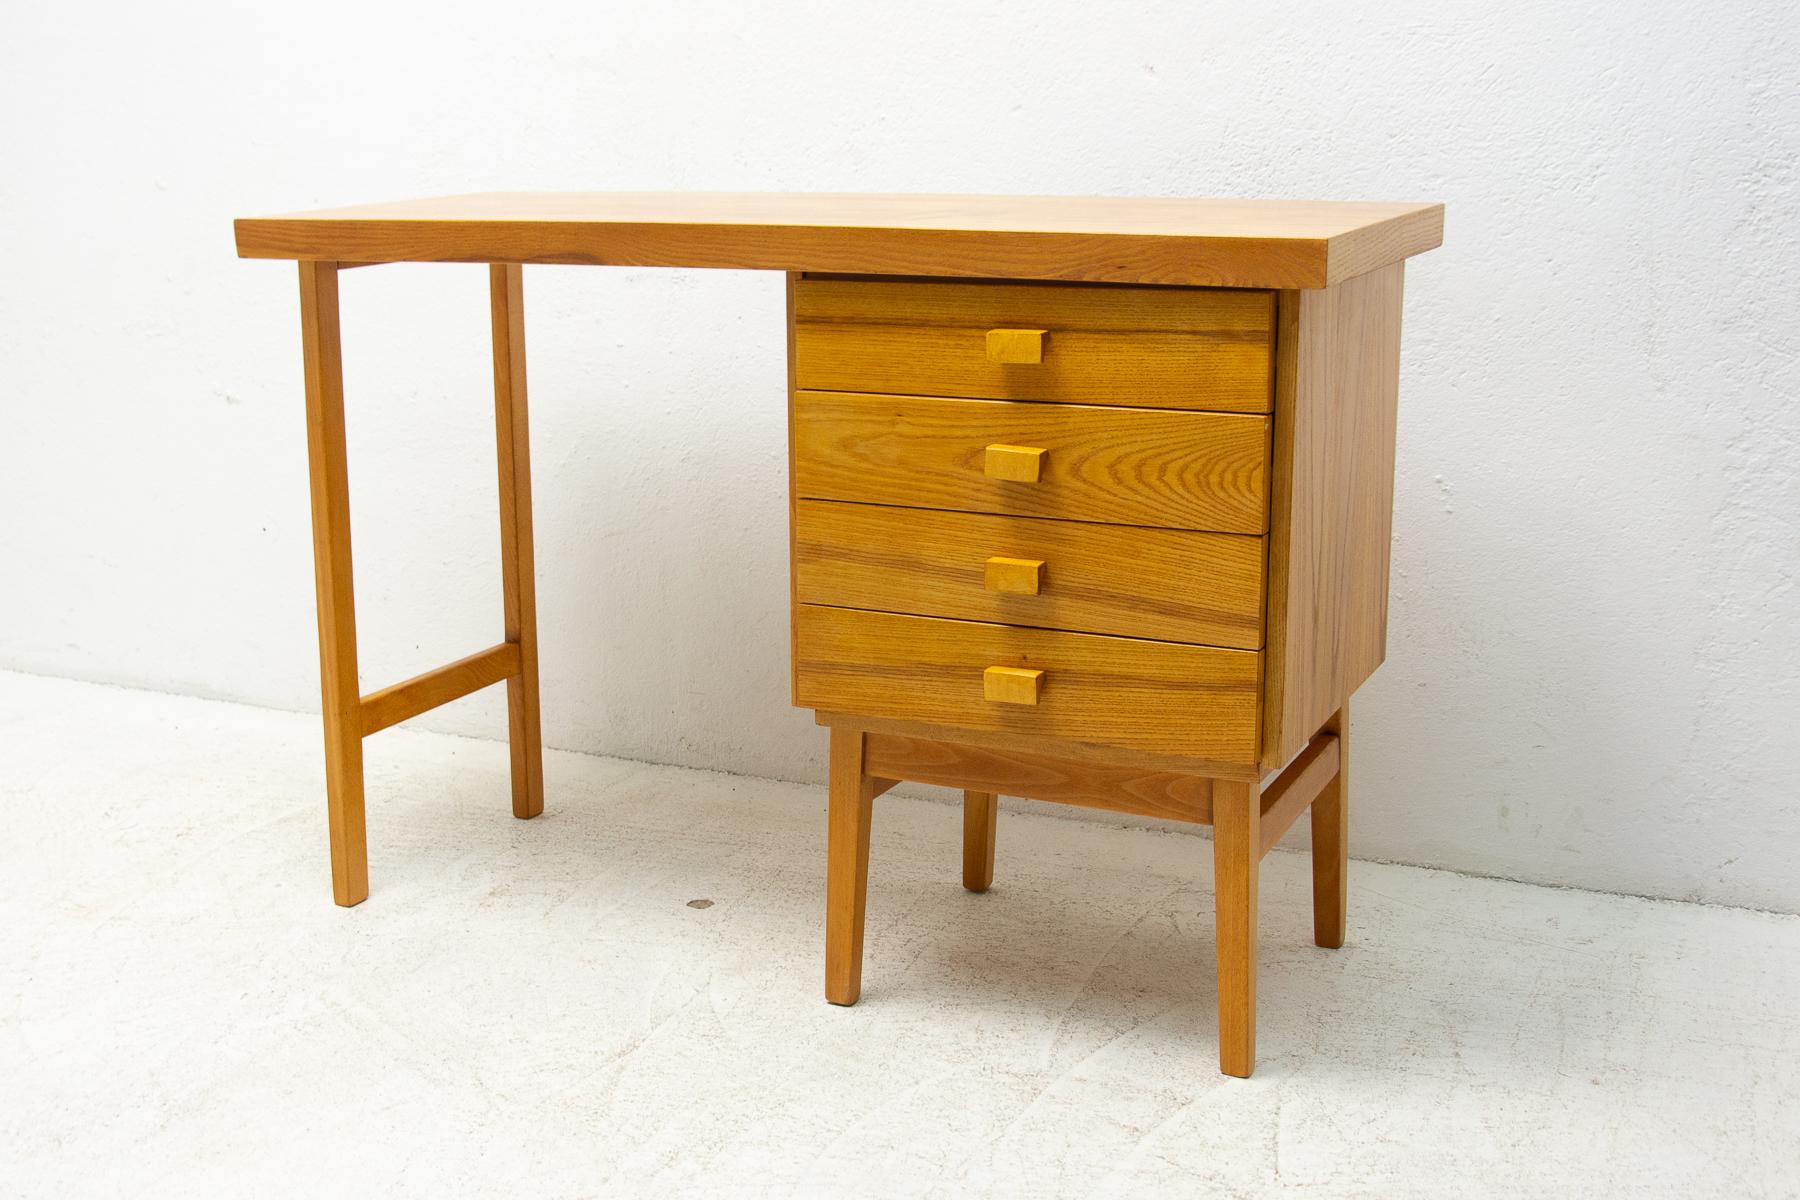 A Simple beech wood writing desk from the Hikor Písek company, 1980´s, Czechoslovakia
The design is very simple and elegant. It features a section with 4 drawers. The surface of this desk has been fully restored and is in very good